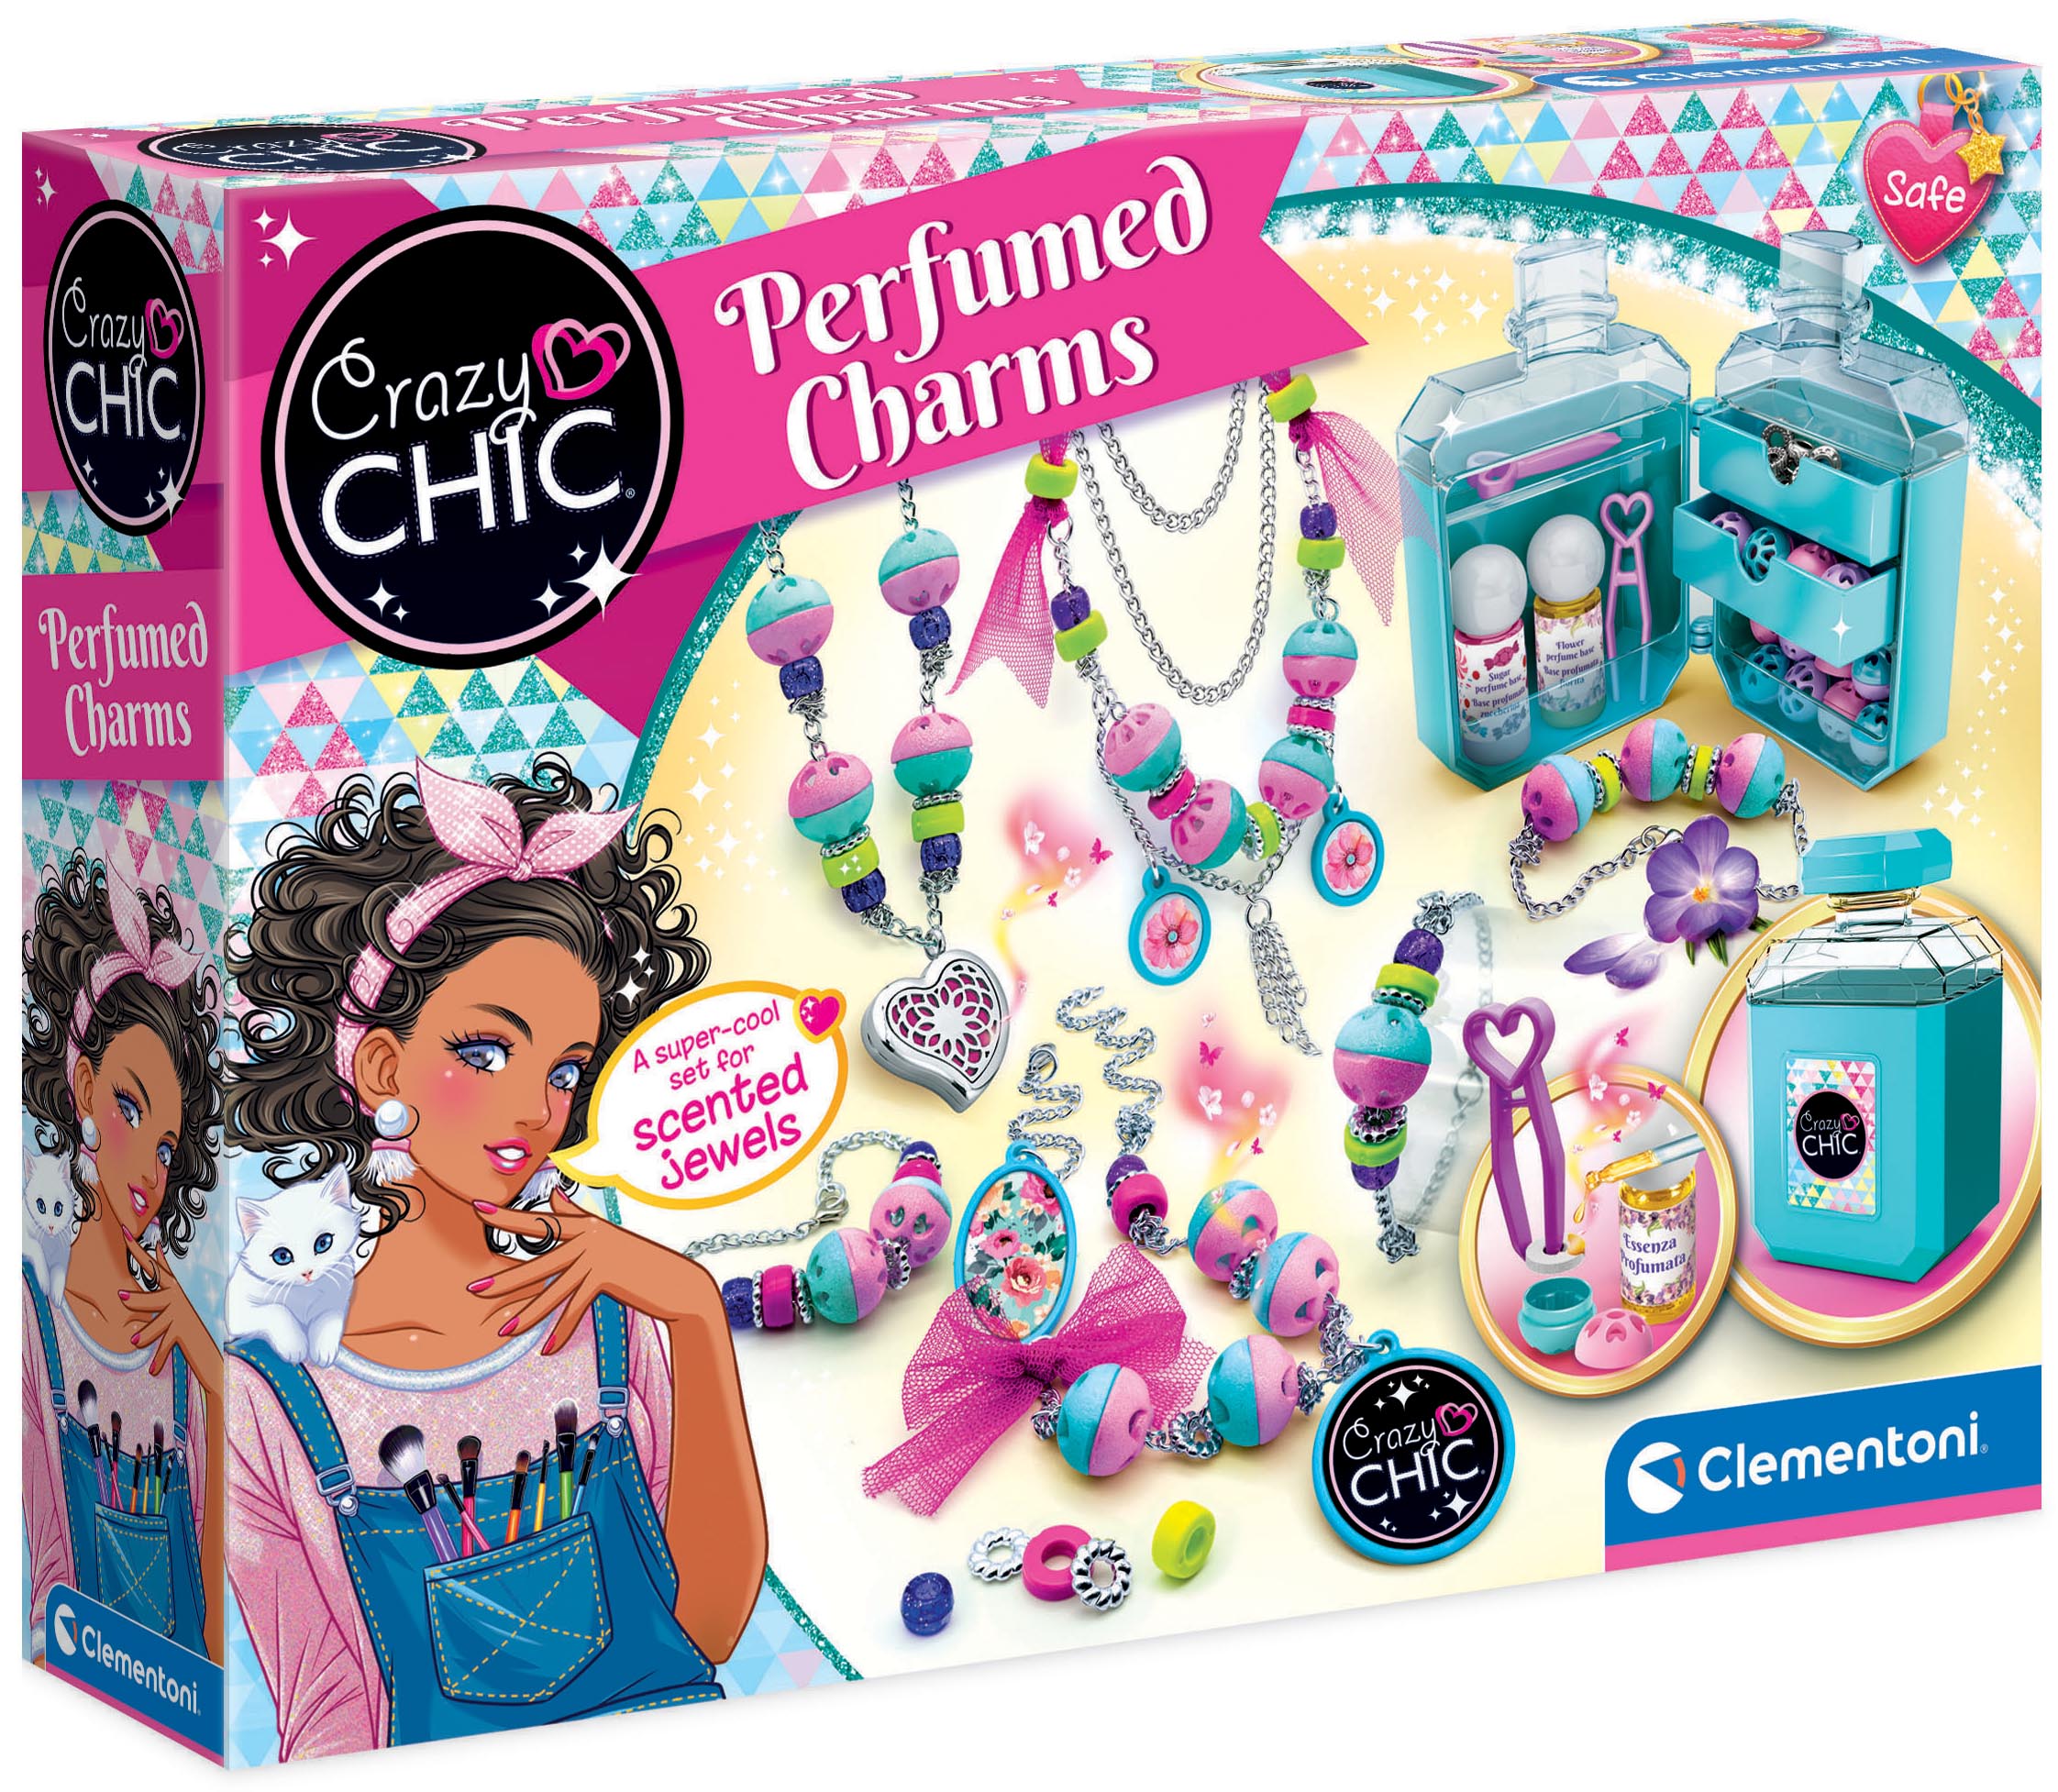 CRAZY CHIC PERFUMED CHARMS TV